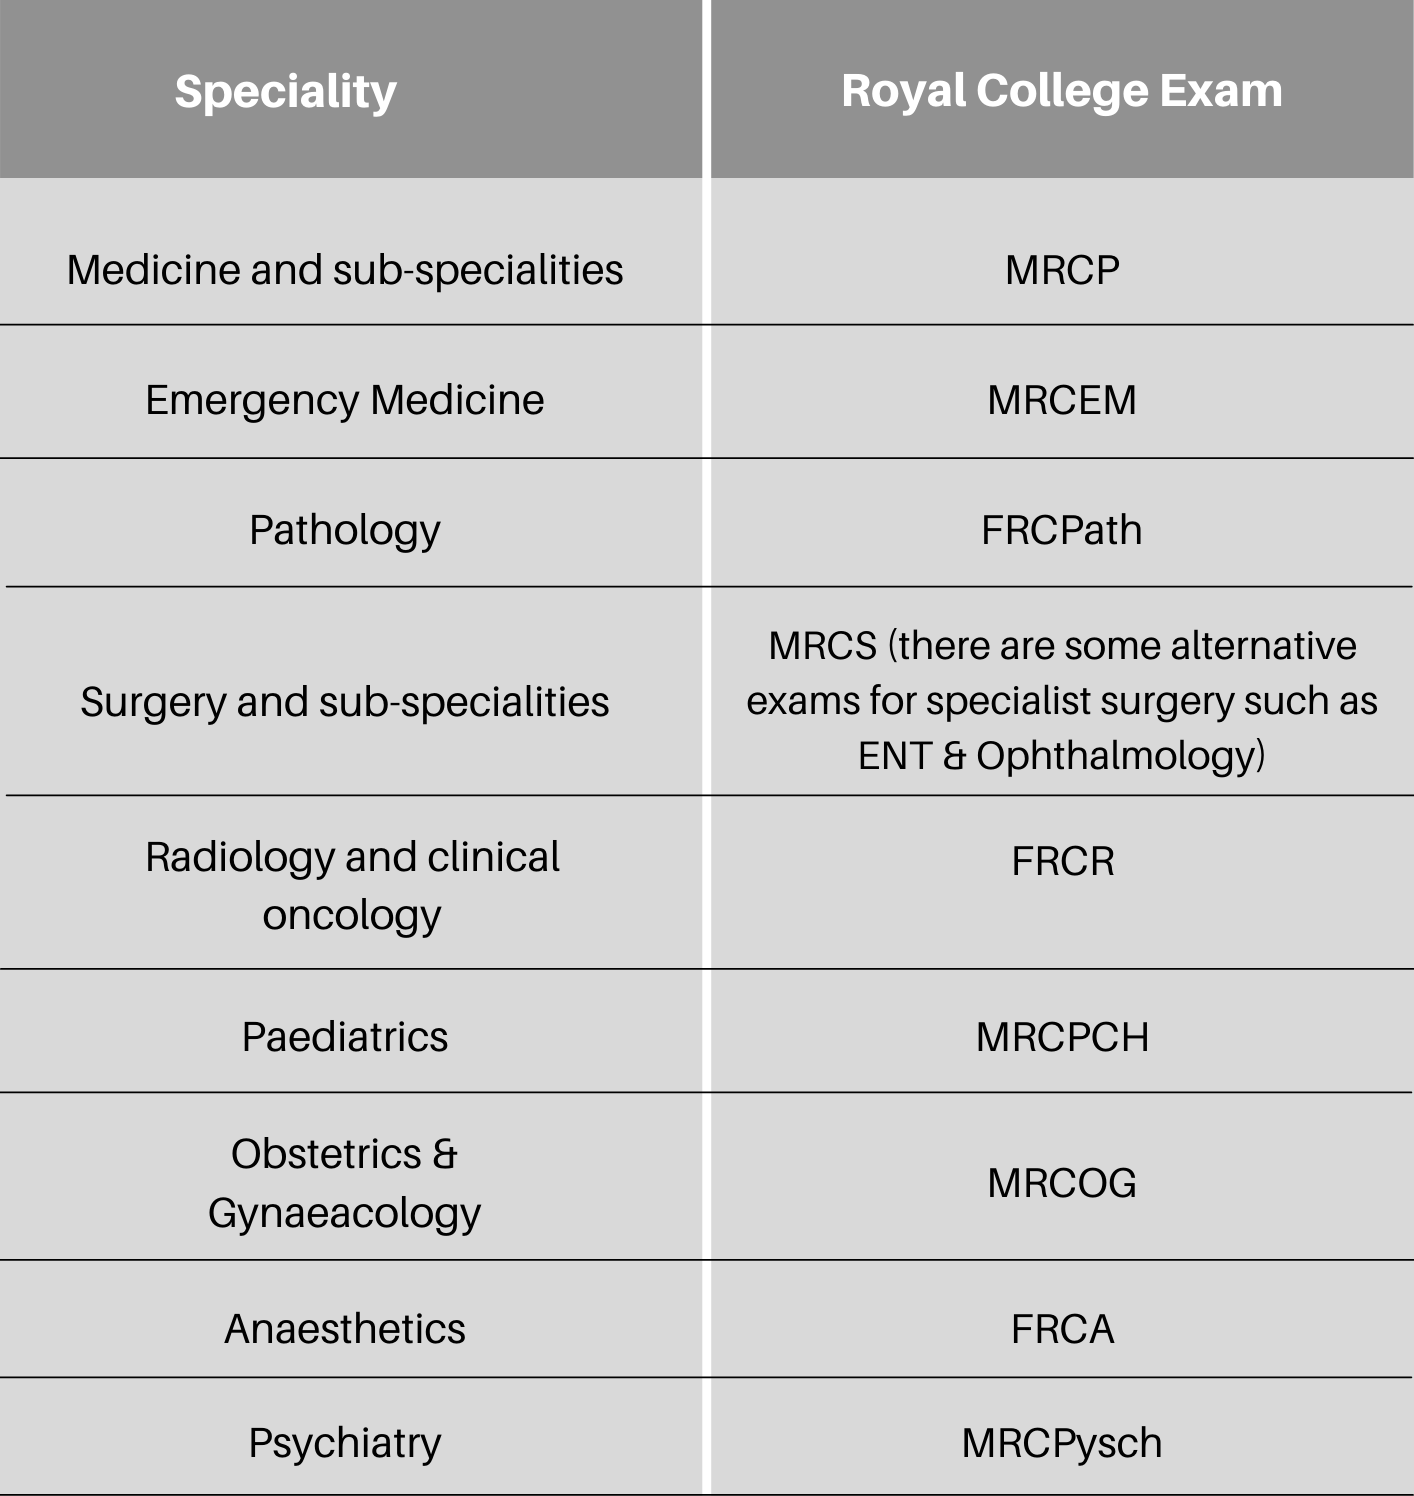 Royal College Exams & Specialities